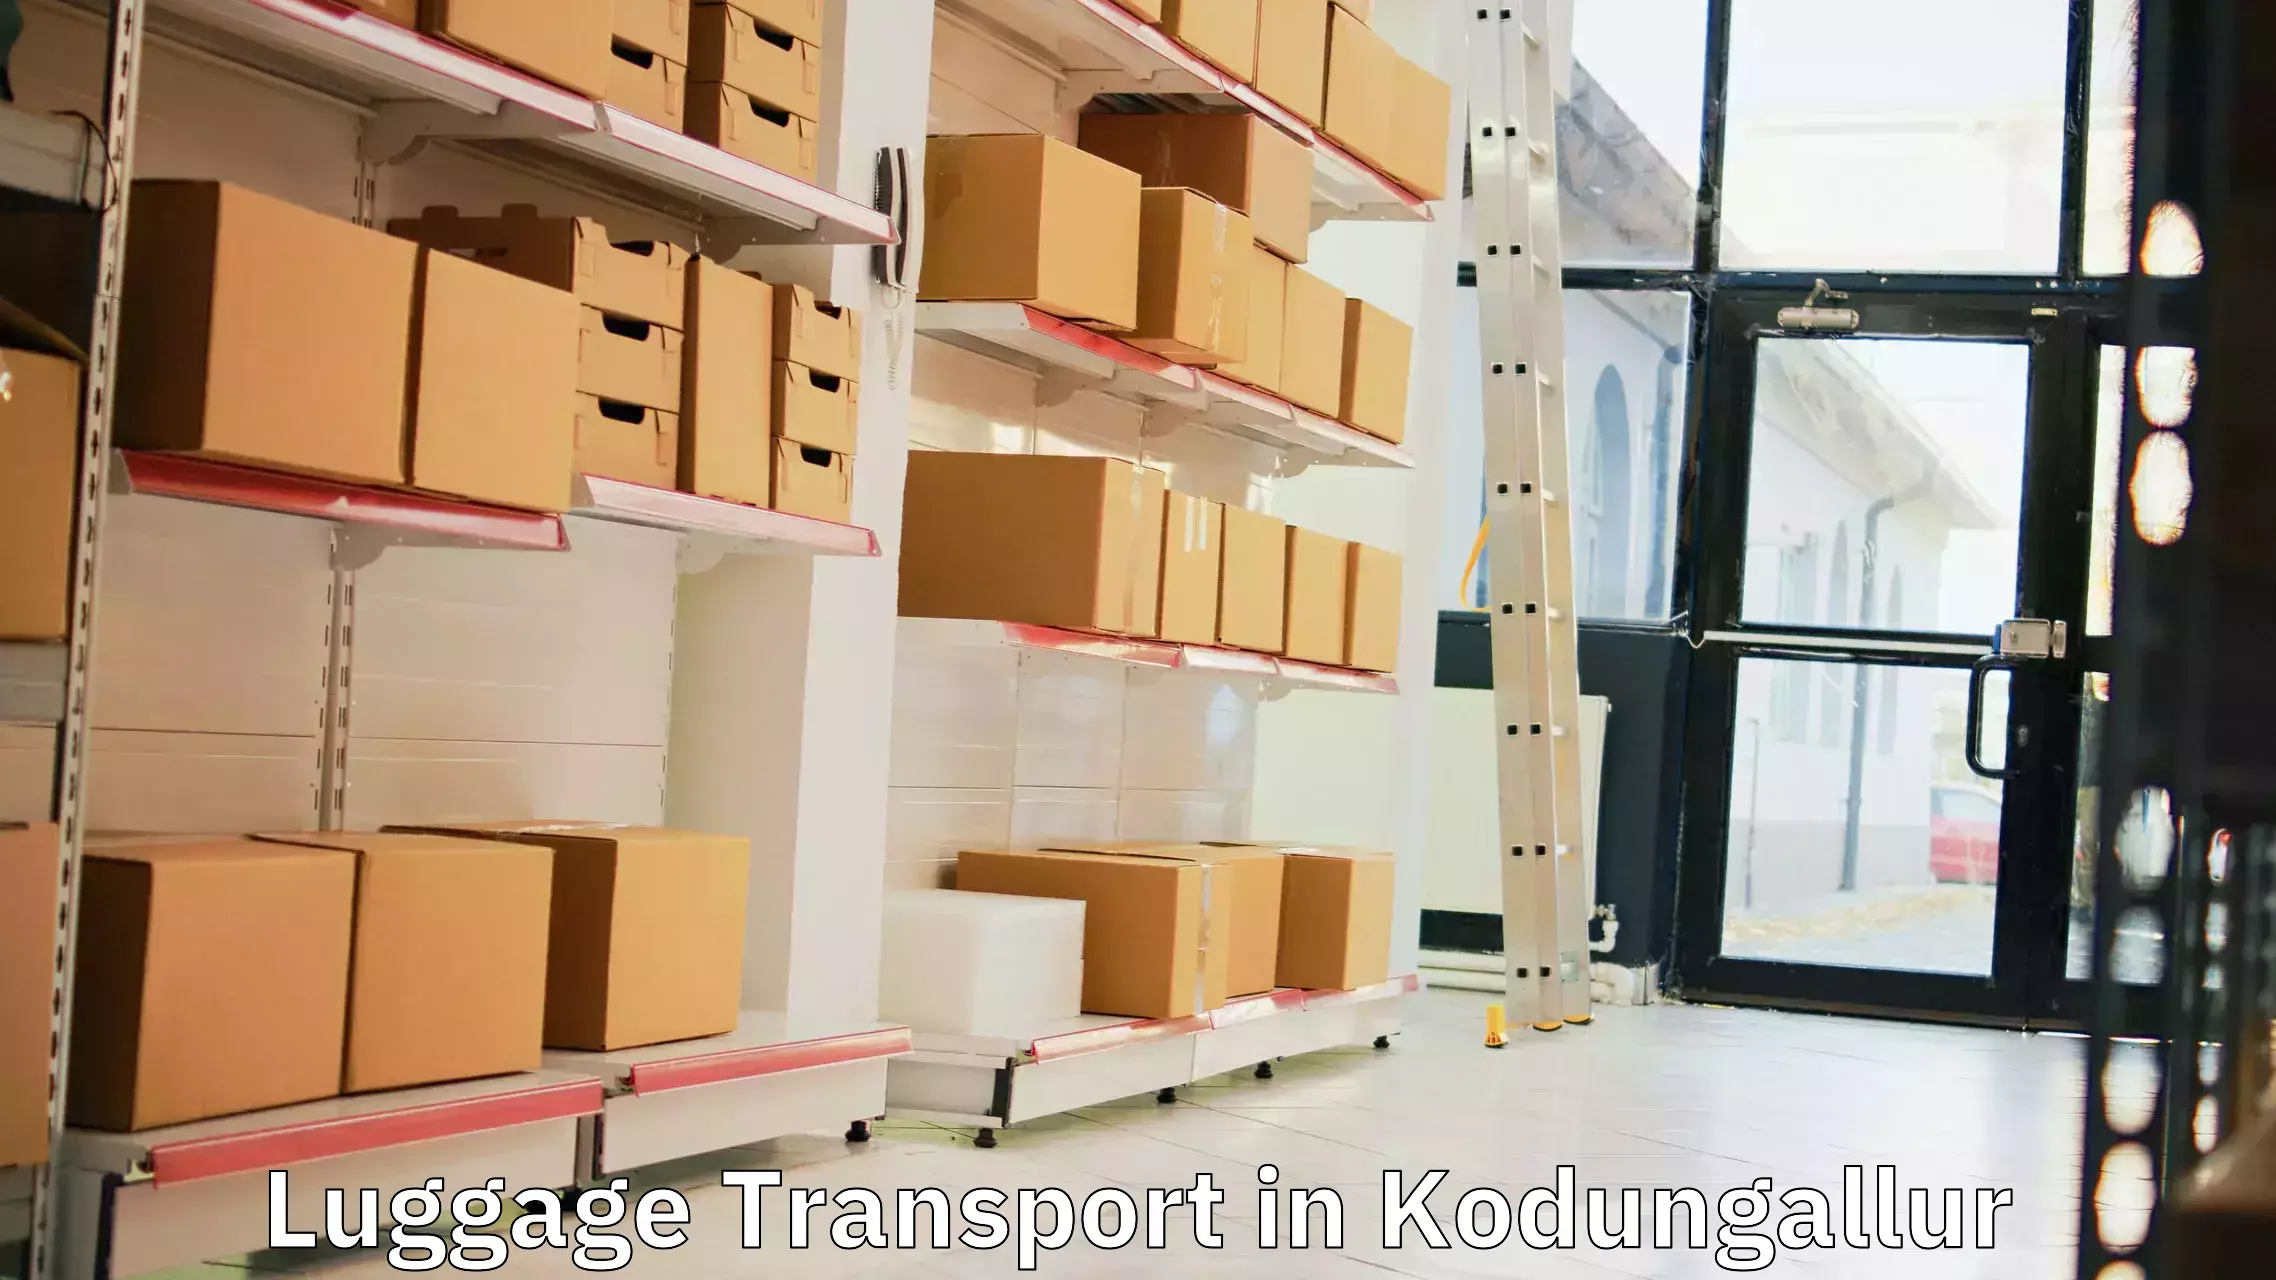 Luggage shipping discounts in Kodungallur